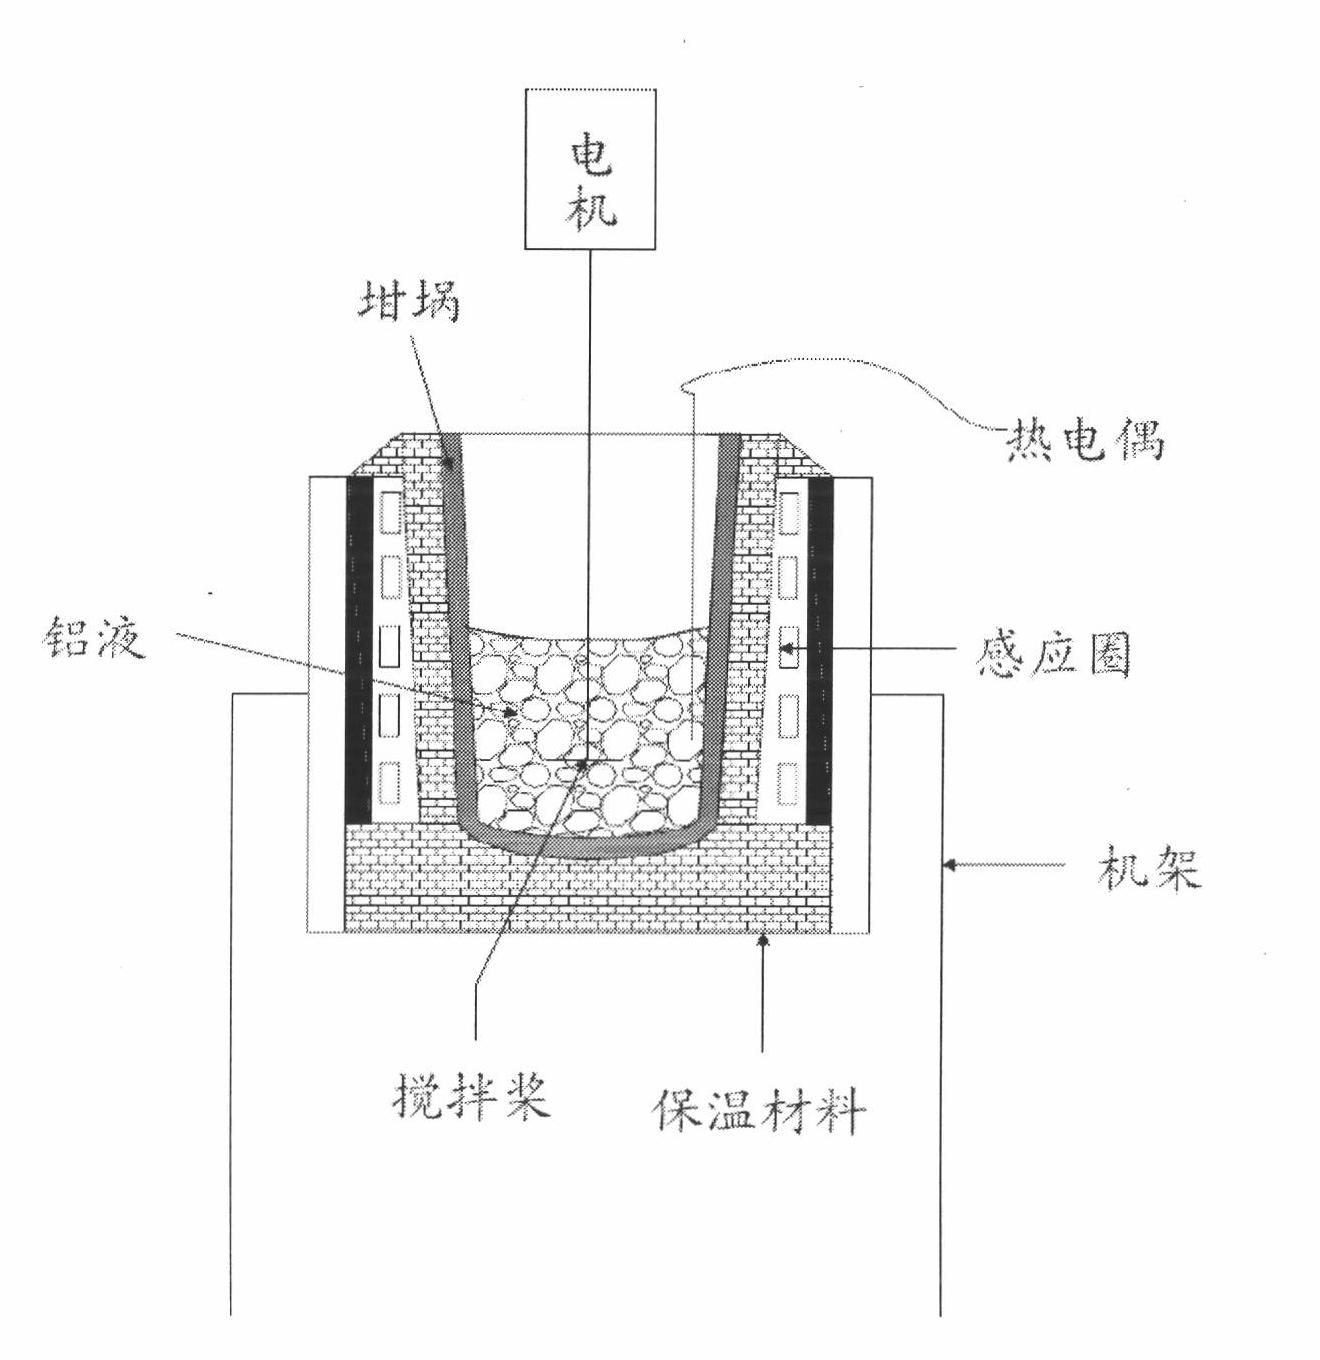 Micro-nano particle reinforced aluminum-based composite material and preparation method thereof